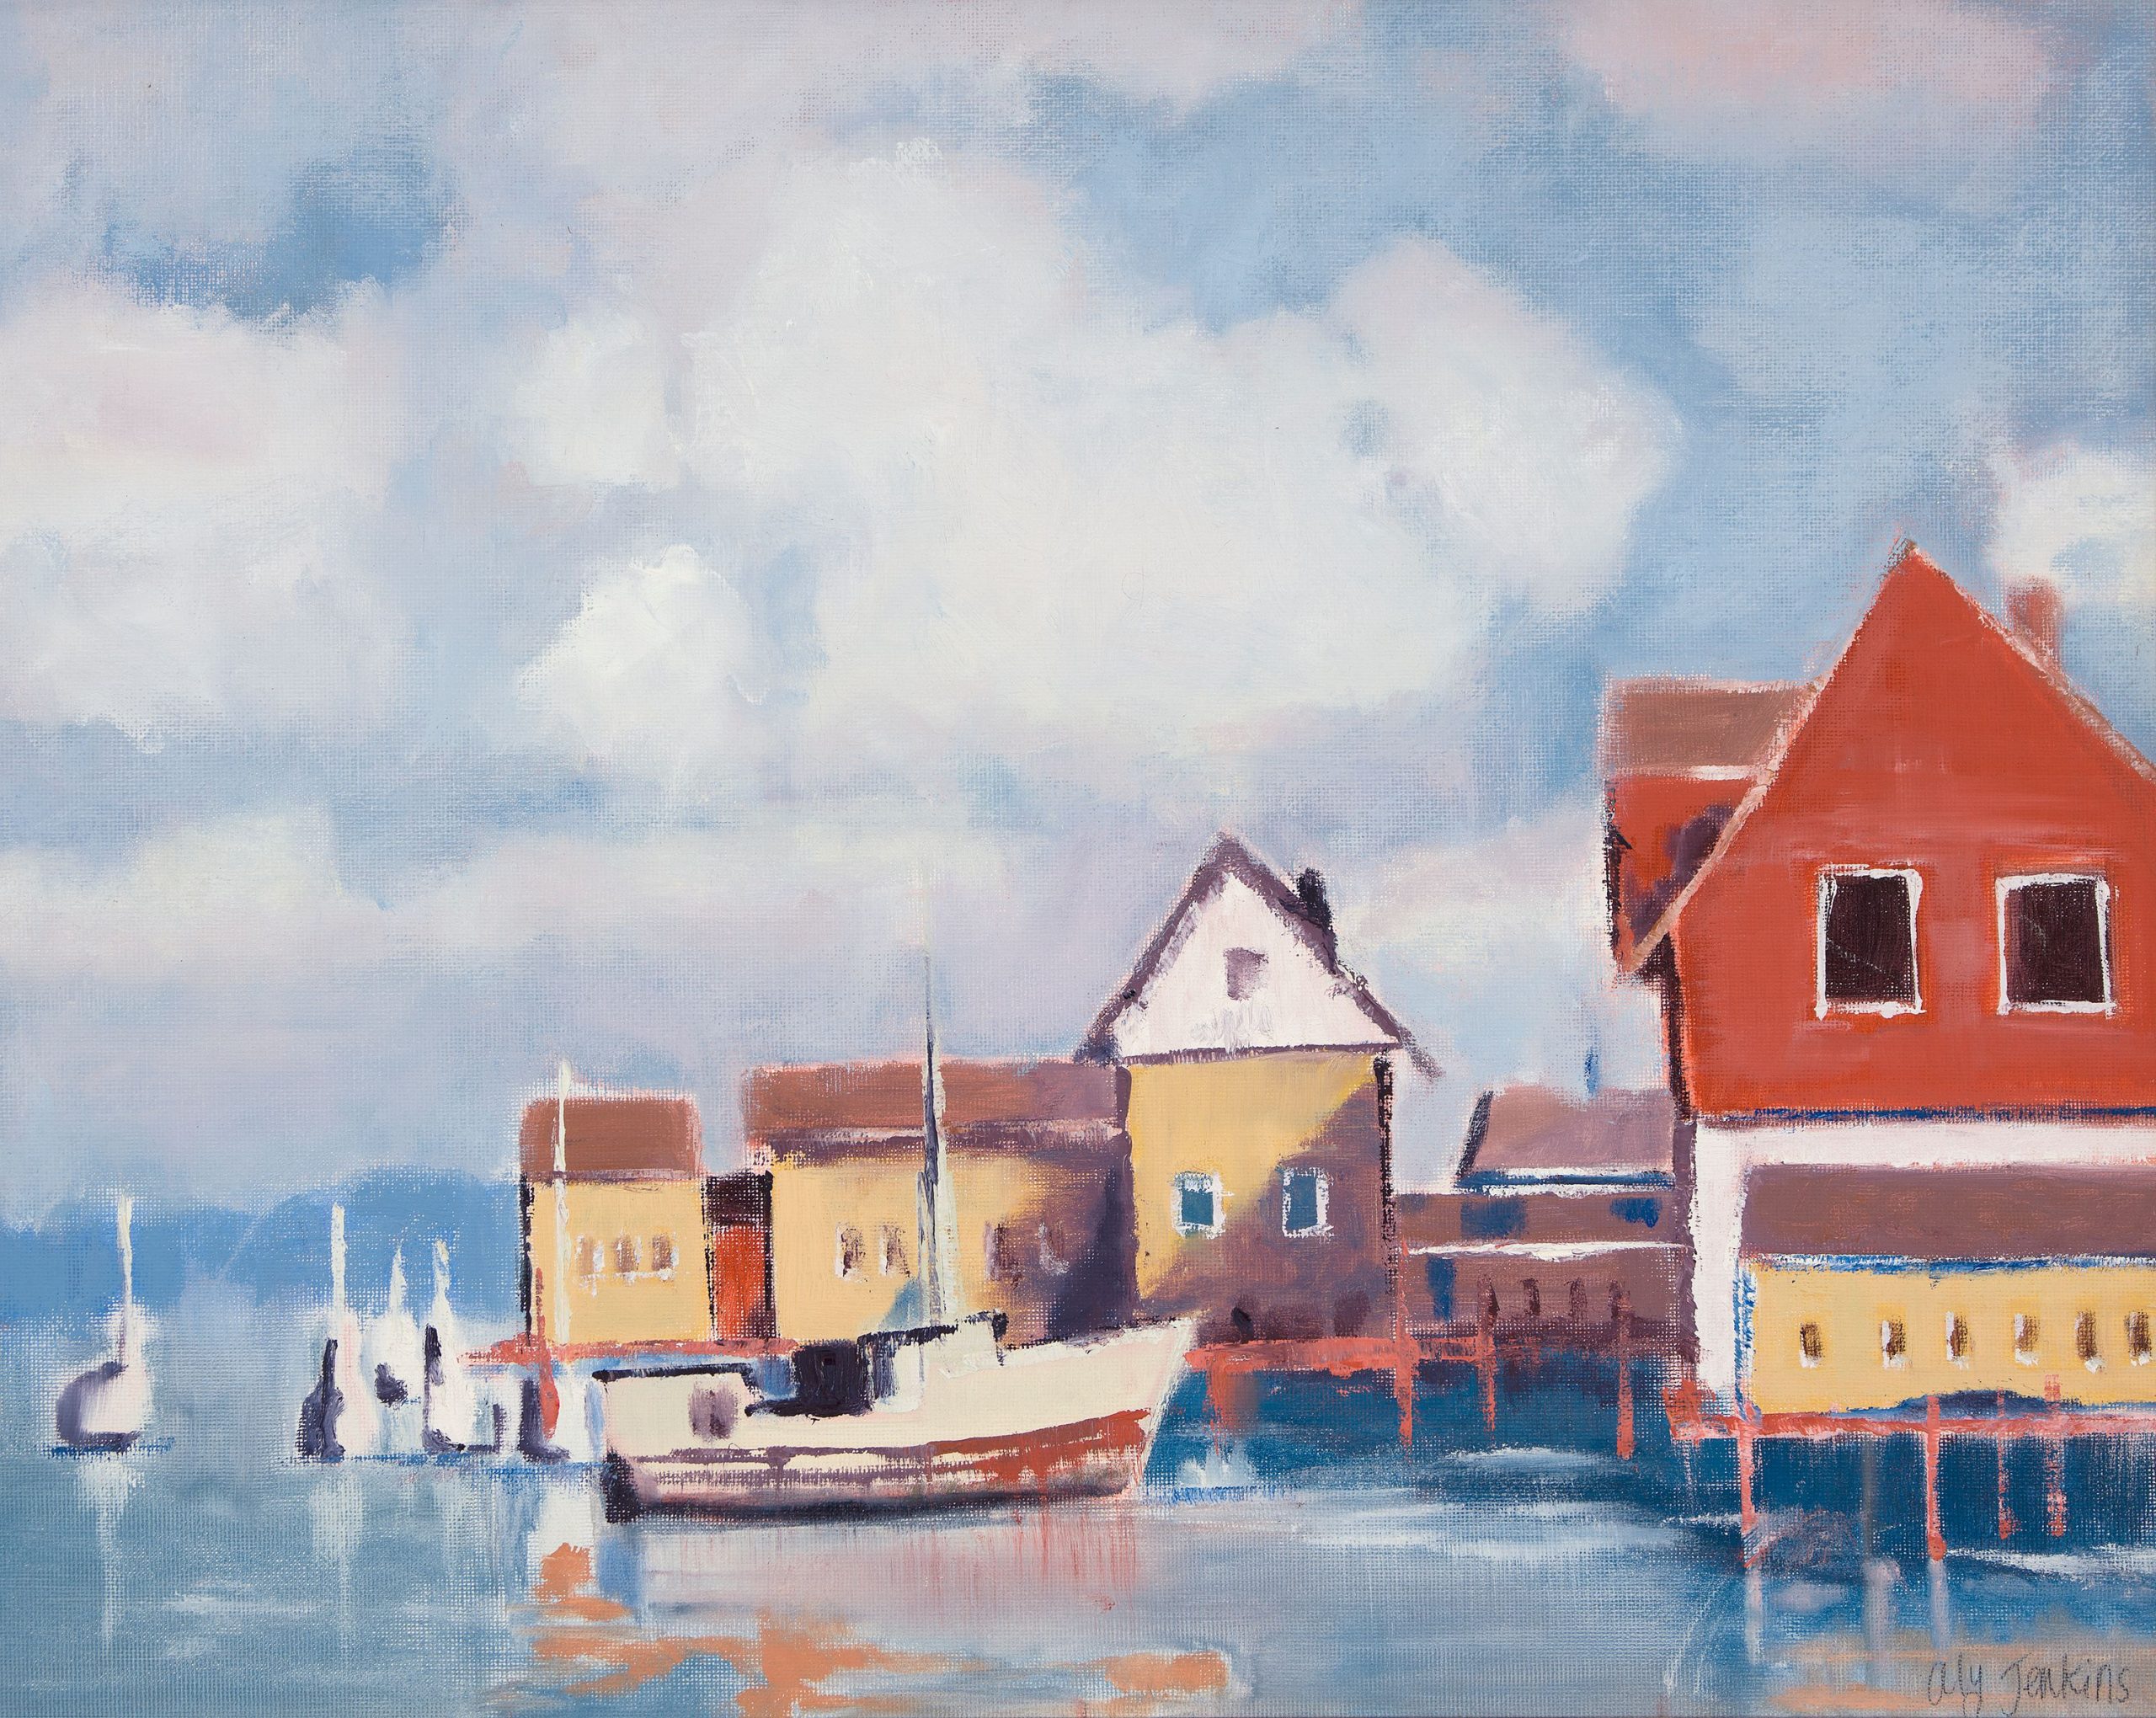 harbor with a sailboat and buildings on stilts